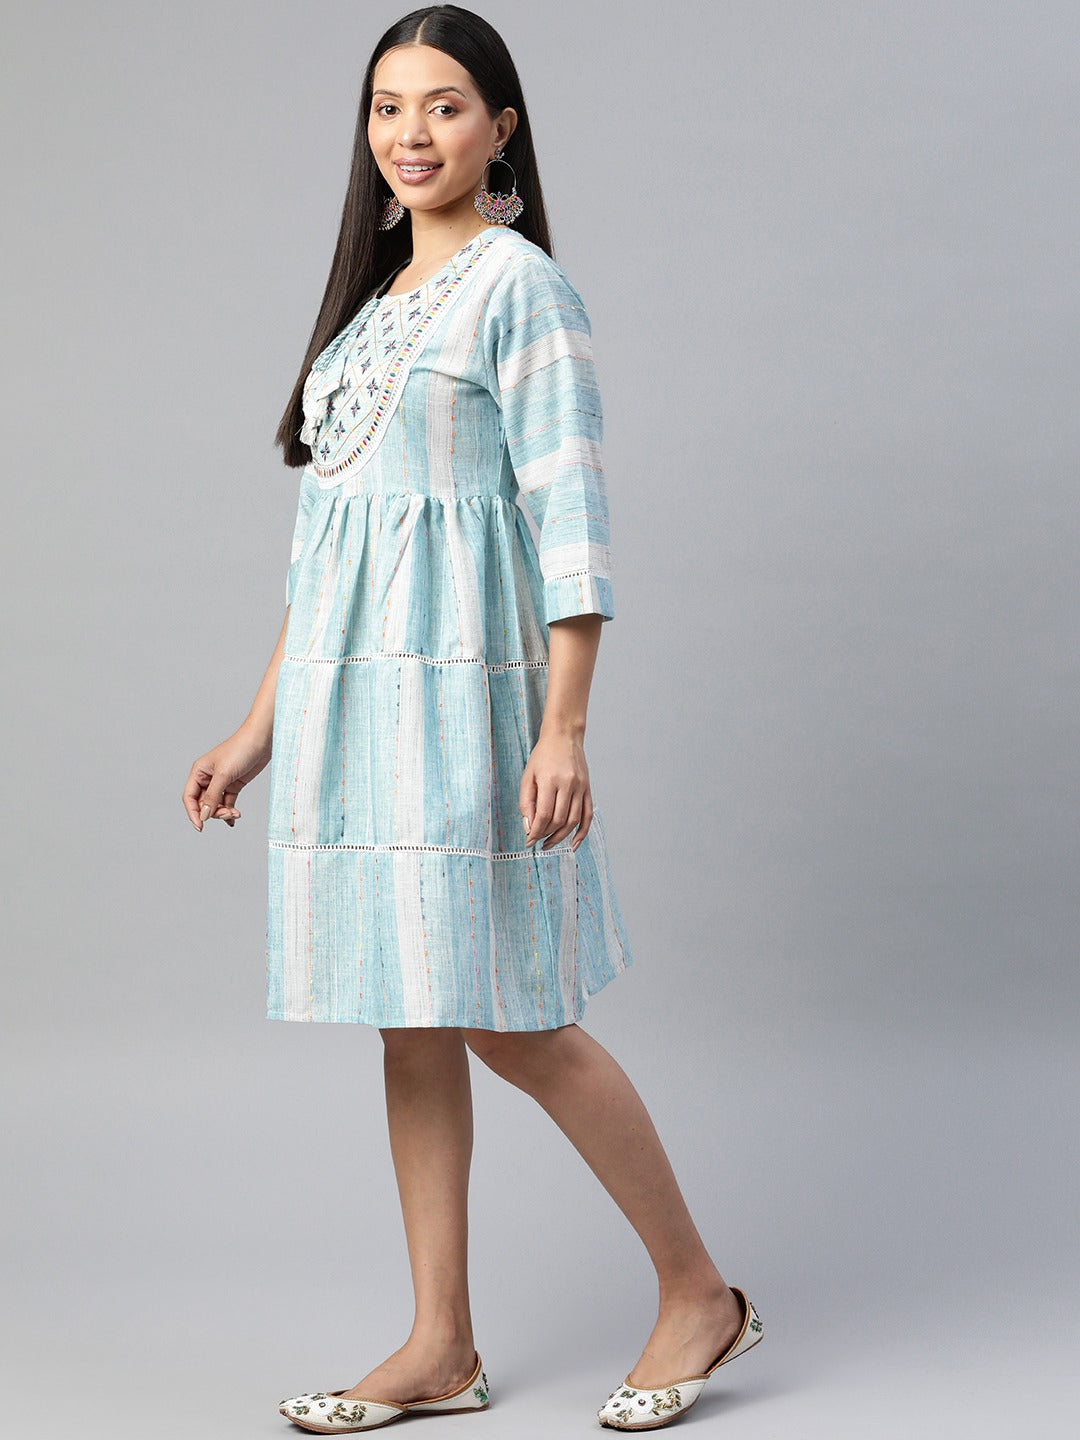 Blue Color Cotton Fabric Tiered Dress